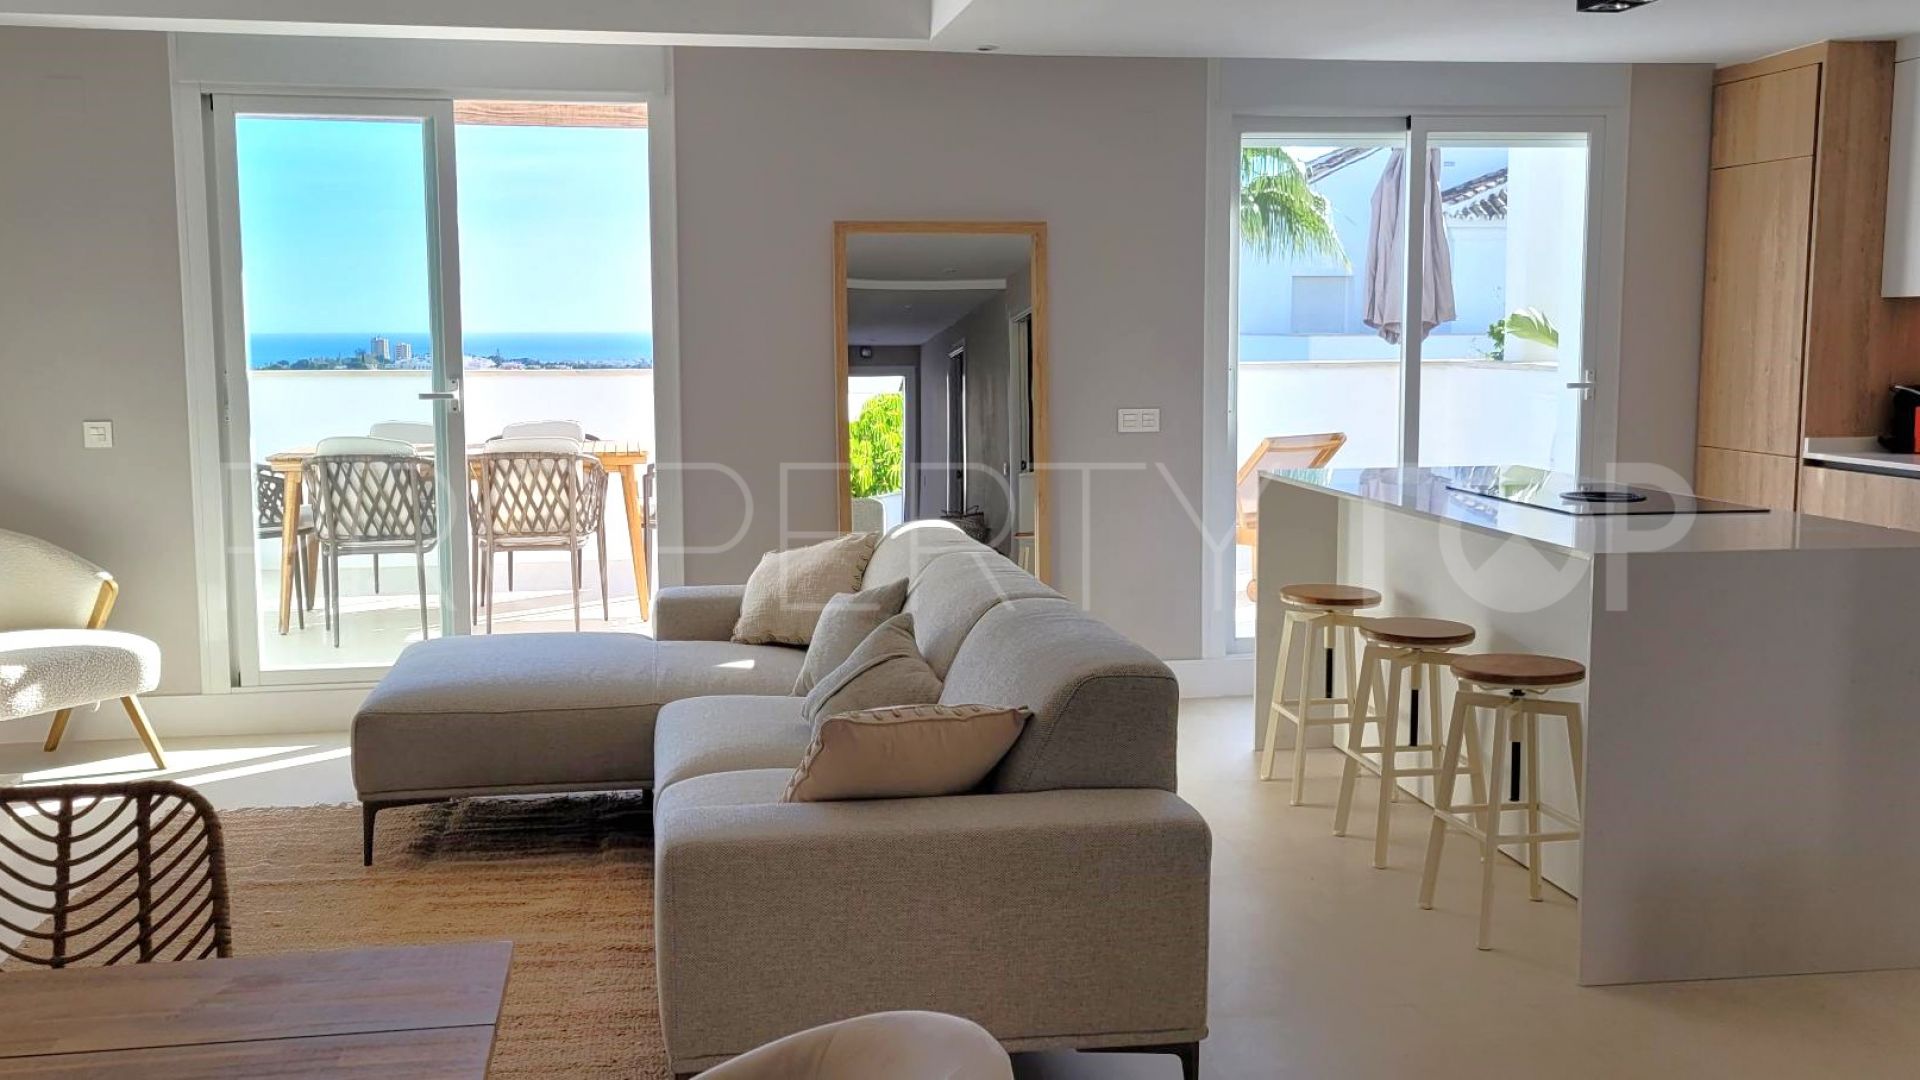 4 bedrooms duplex penthouse for sale in Aloha Royal